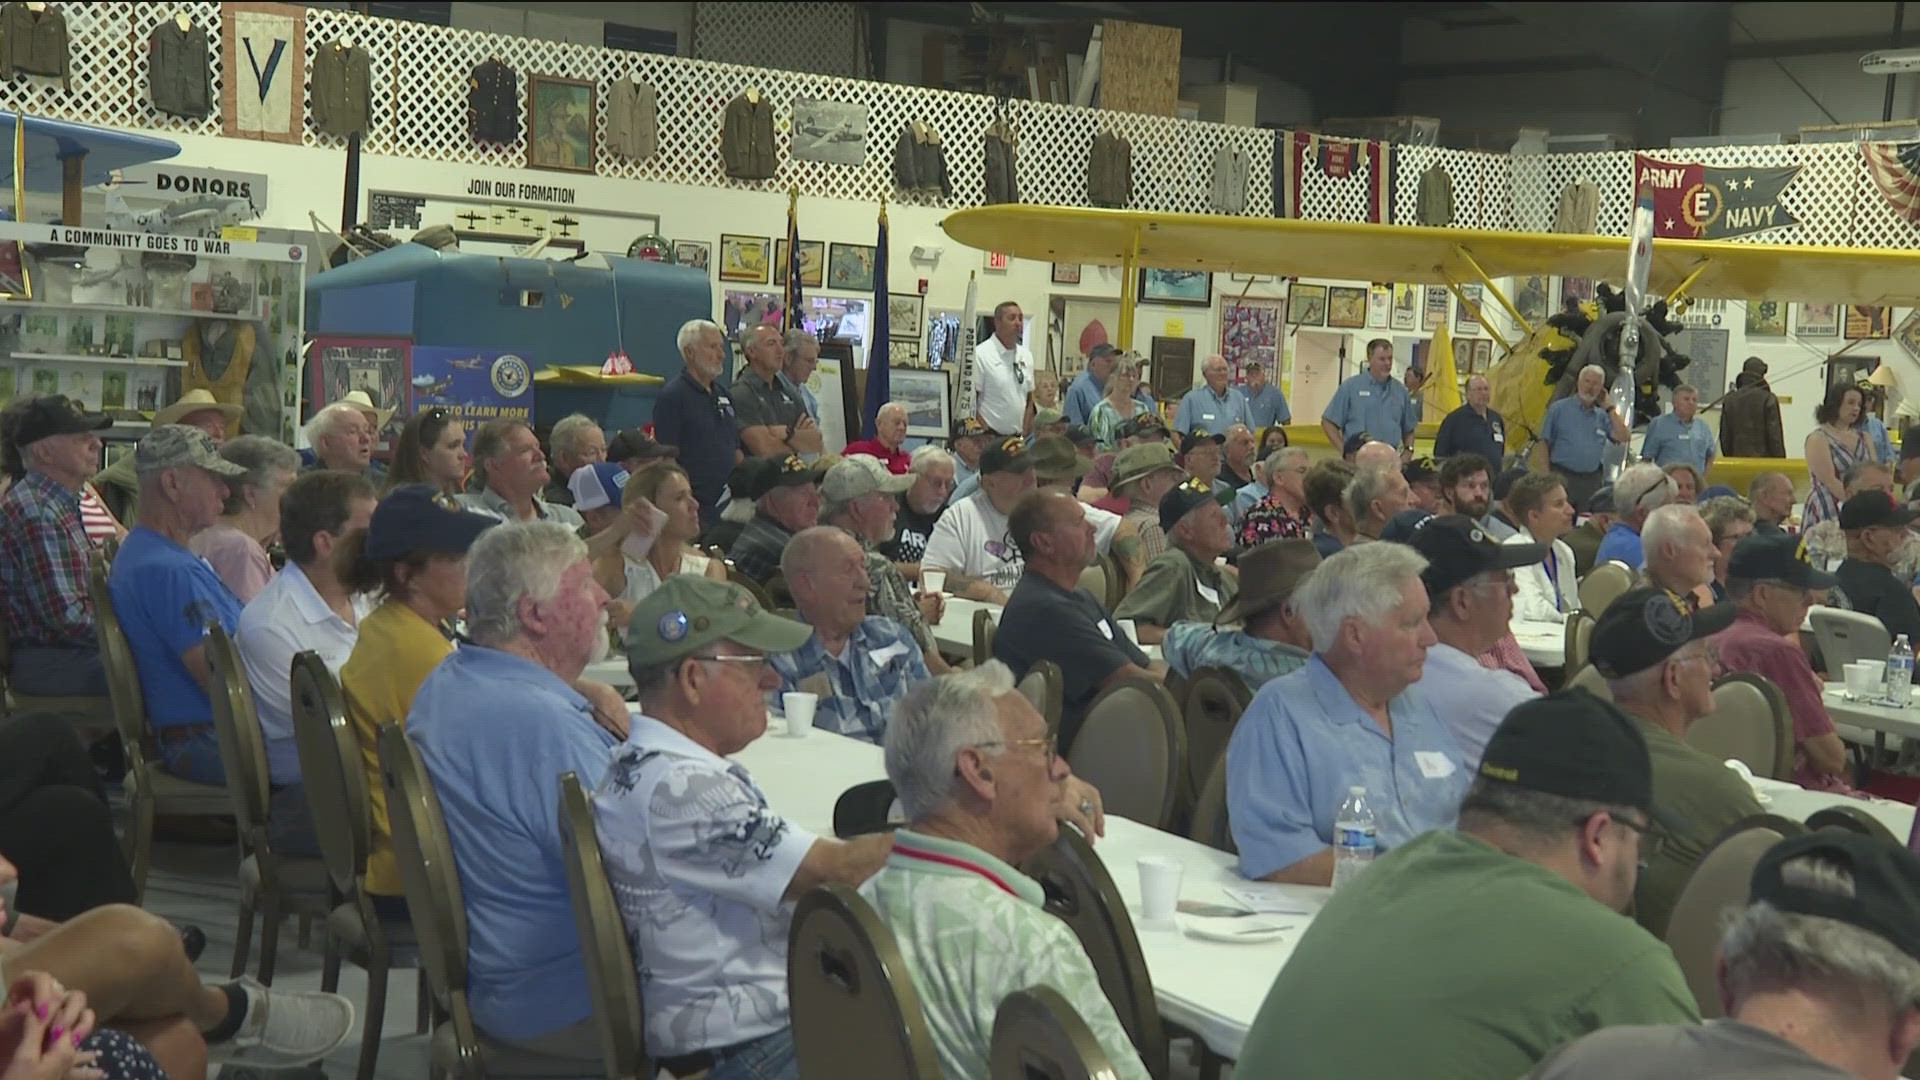 What began with 15 veterans meeting monthly to share stories and bond, has now evolved to Idaho's largest gathering of veterans - with nearly 300 attendees.